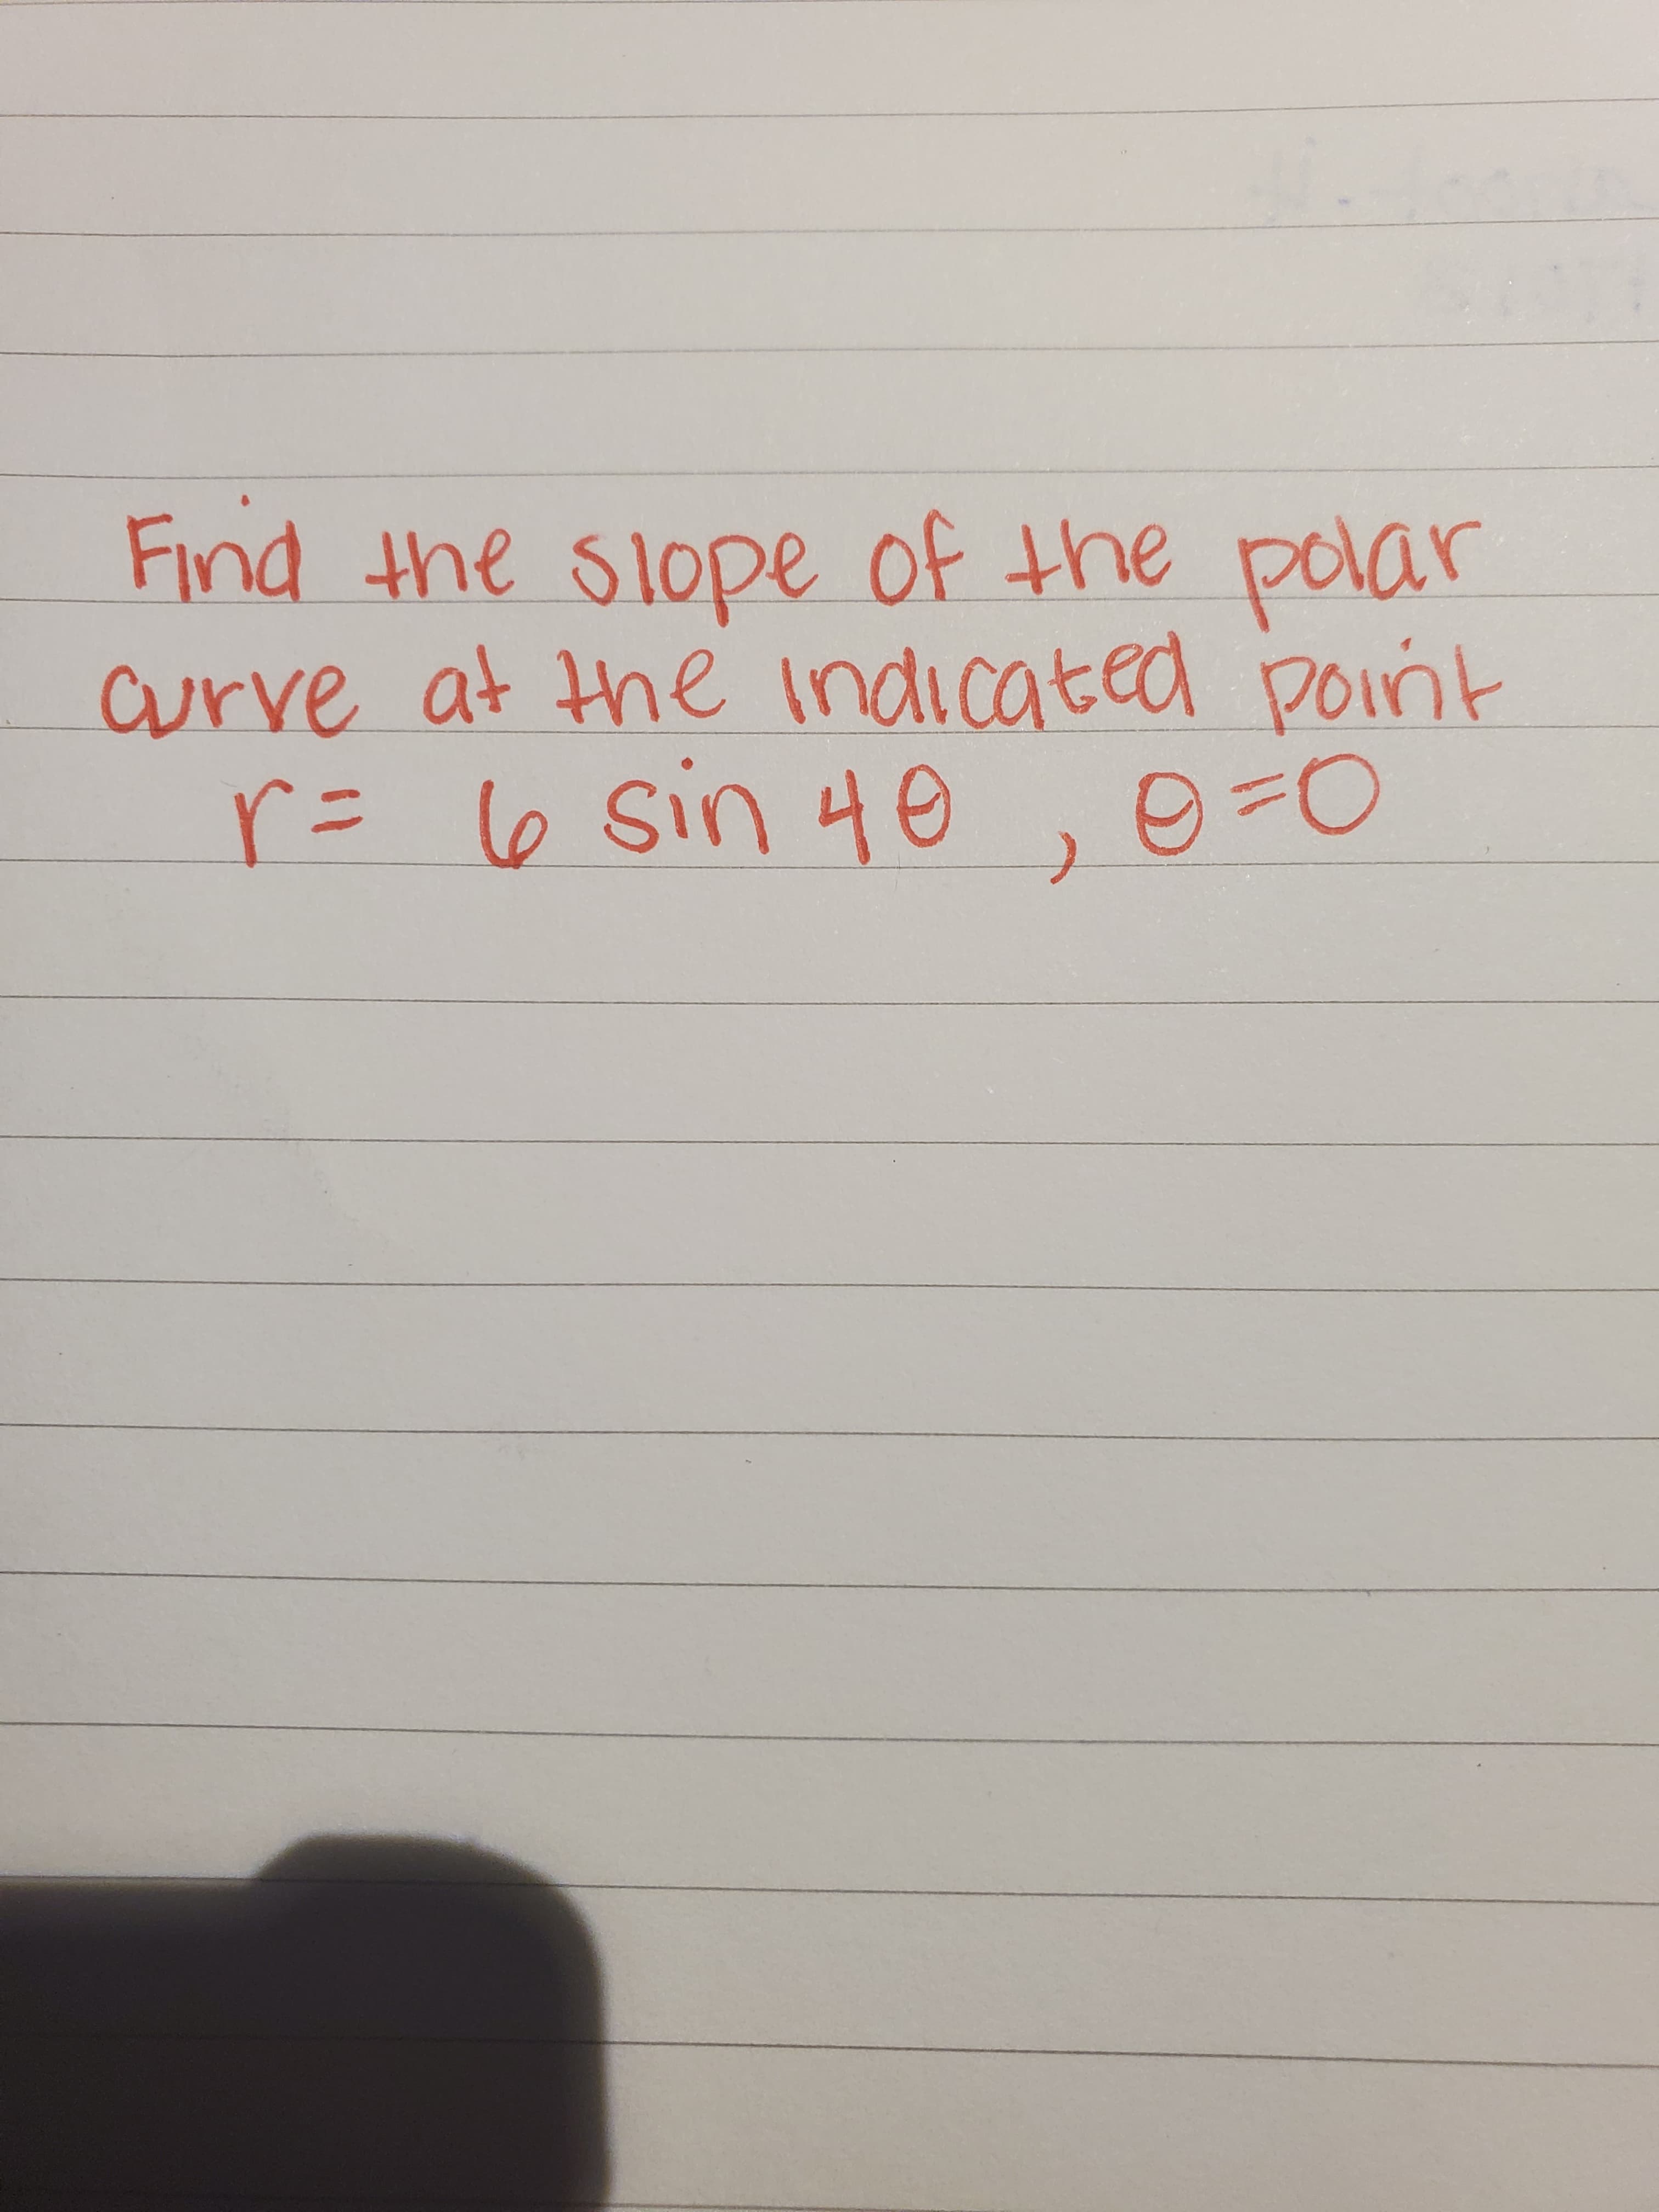 Find the Slope of the polar
urve at the indicated pont
r= 6 sin 4e
